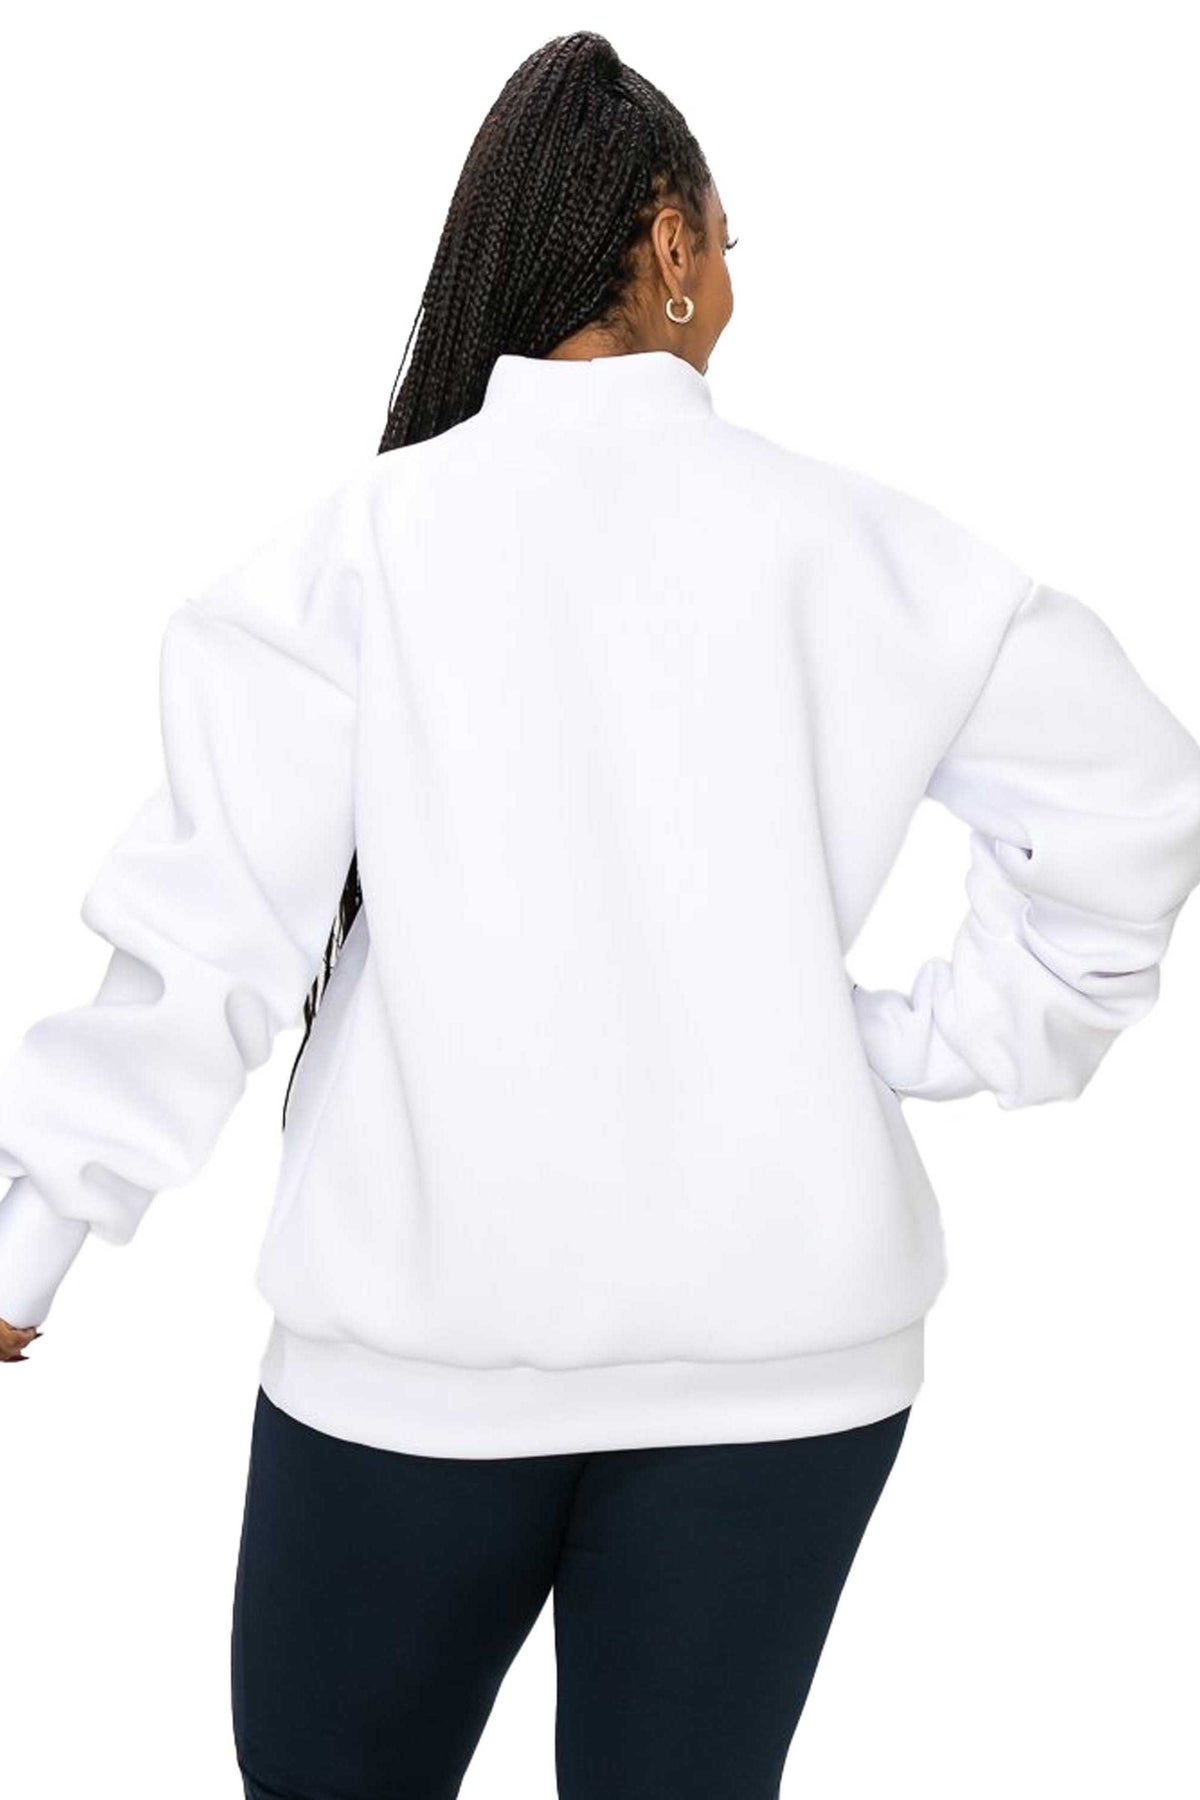 livd L I V D women's contemporary plus size boutique neoprene sweater sweatshirt with exaggerated sleeves in arctic white